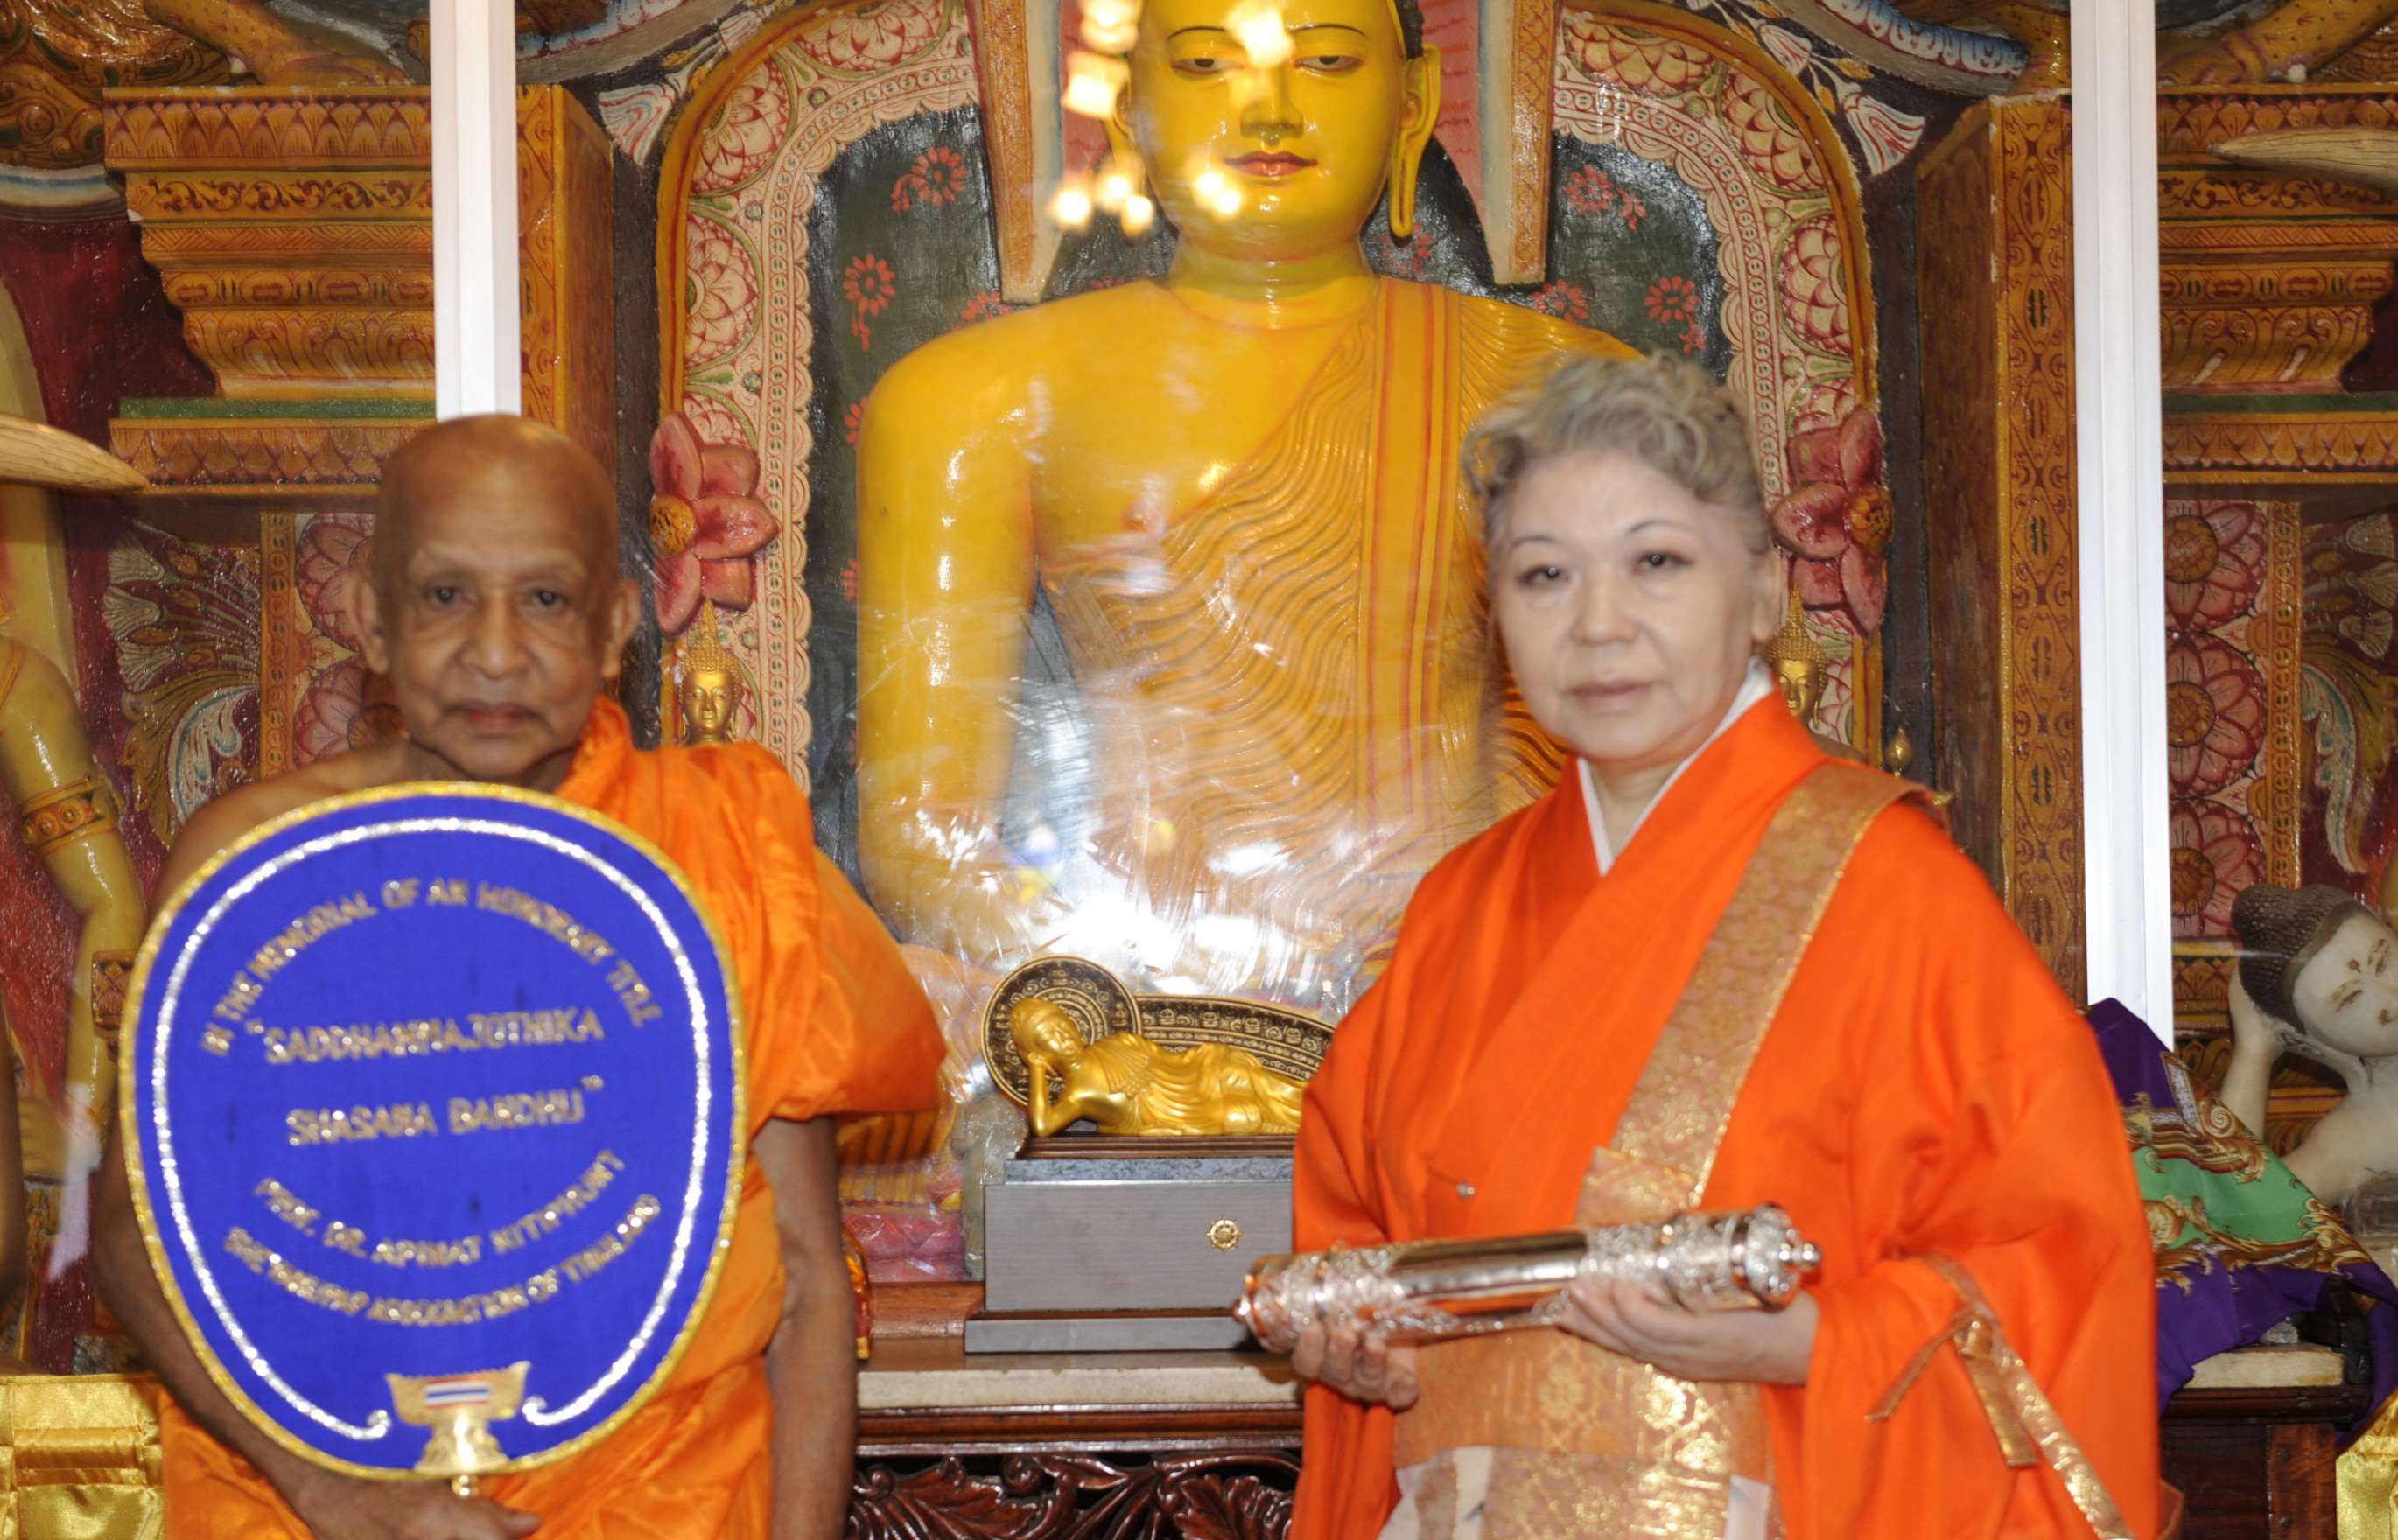 Her Holiness, in an orange robe, holds a golden cylinder, standing next to a shaven-headed monk who holds a large ceremonial fan decorated with words, in front of a large statue of Buddha.